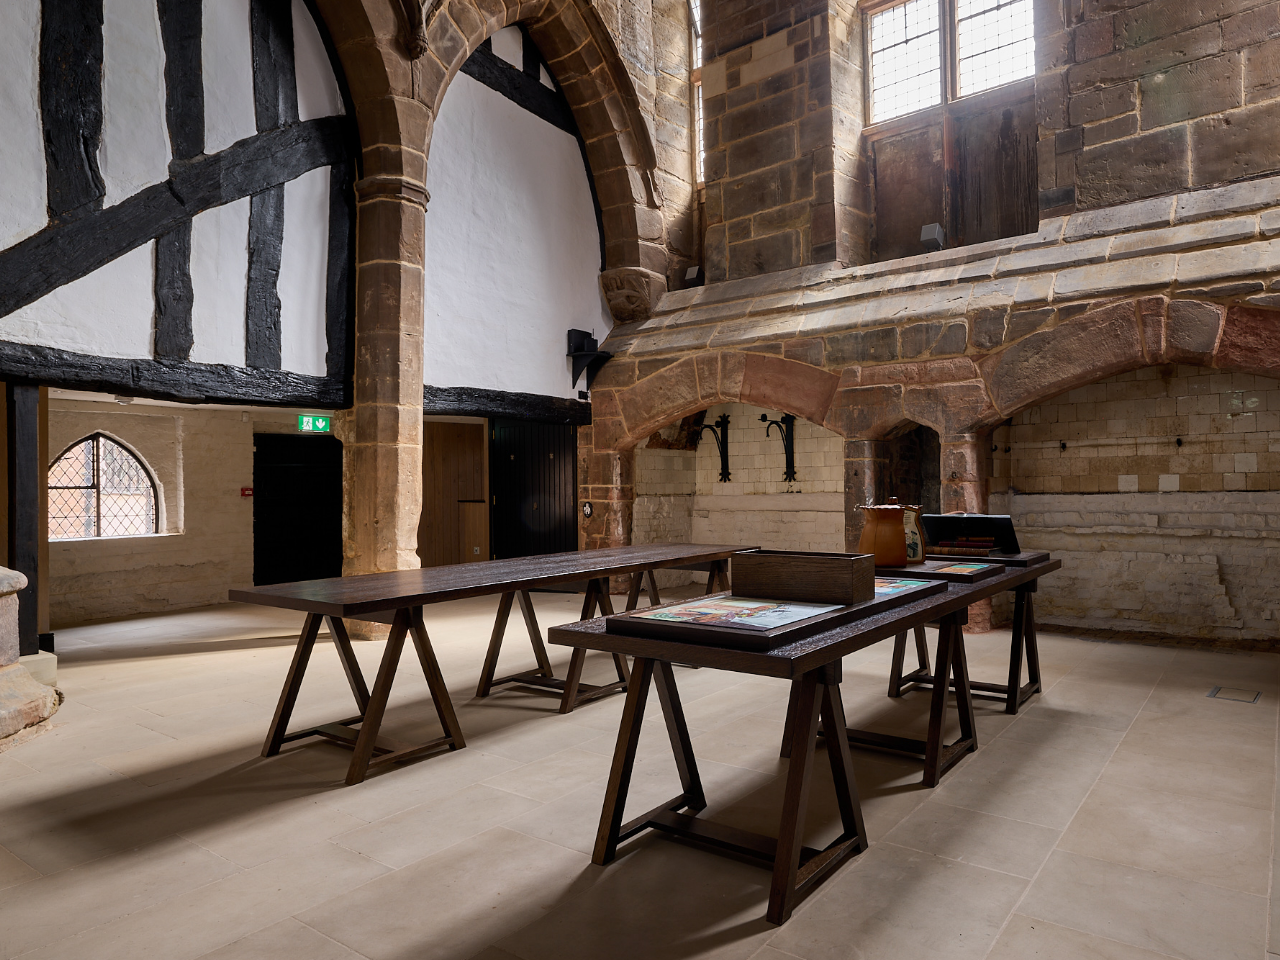 Uncovering the medieval kitchen at St Mary's Guildhall